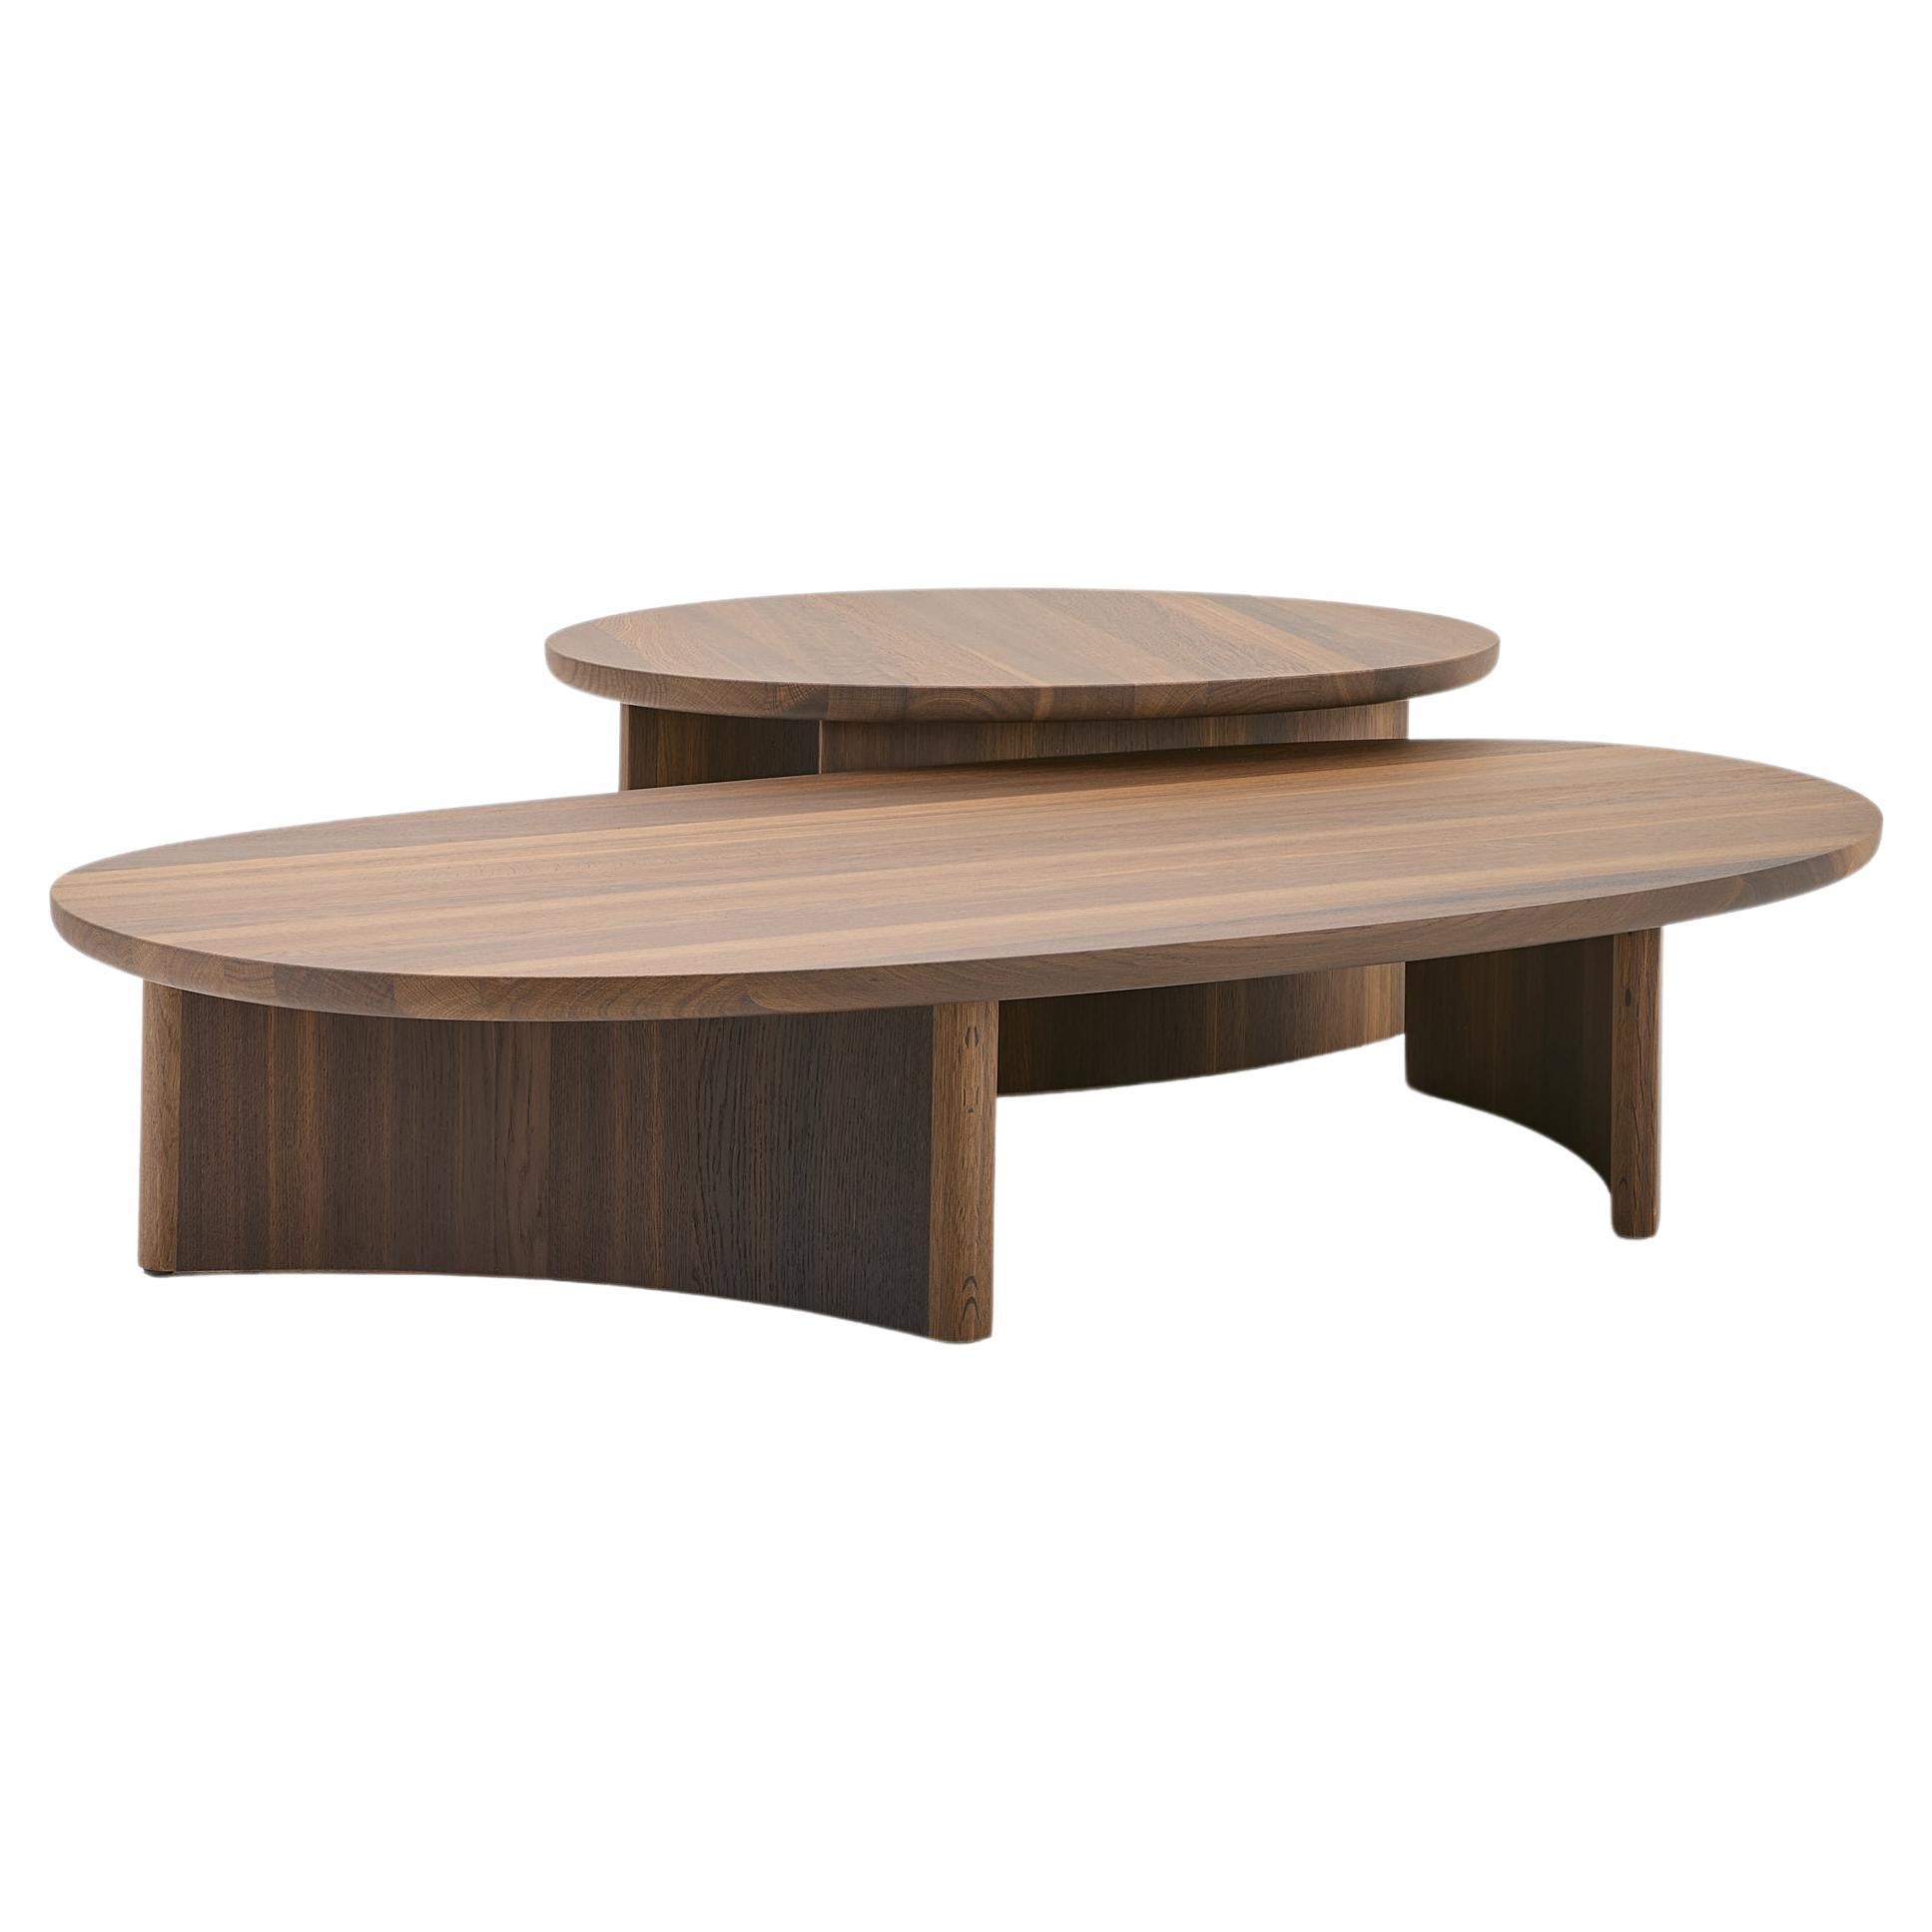 DIFFERENT DIMENSIONS & FINISHES AVAILABLE.
SIZE ADVERTISED: 140x75x30 & 90x74x37.5

The Dew coffee table was designed by the distinguished Sabine Marcelis and is a follow-up to the Dew dining table. Like the dining table, the Dew coffee table is